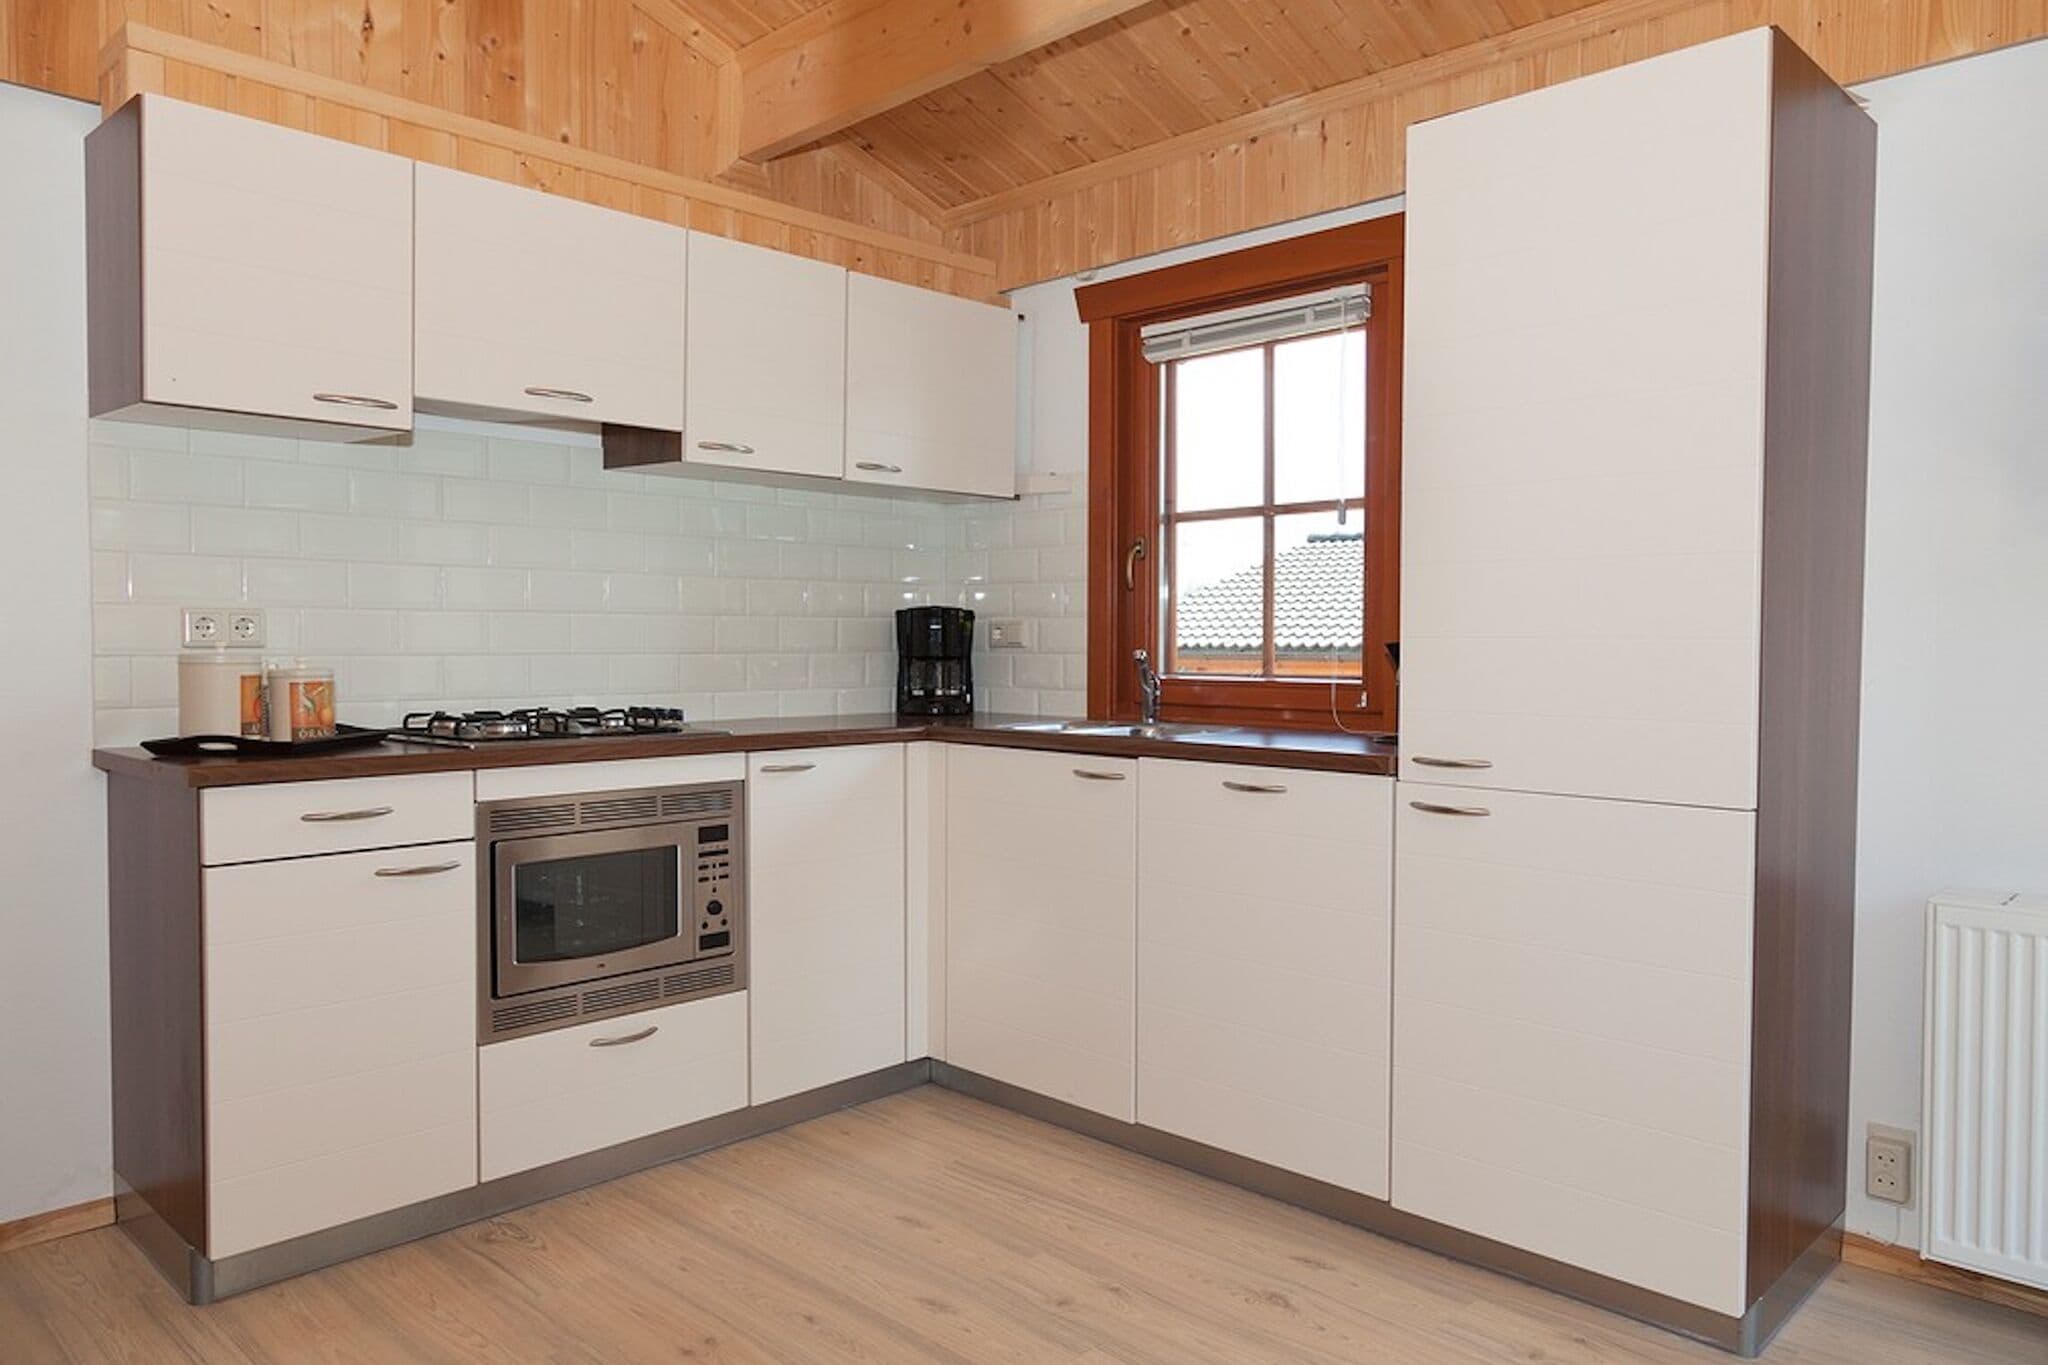 Wooden holiday home with microwave